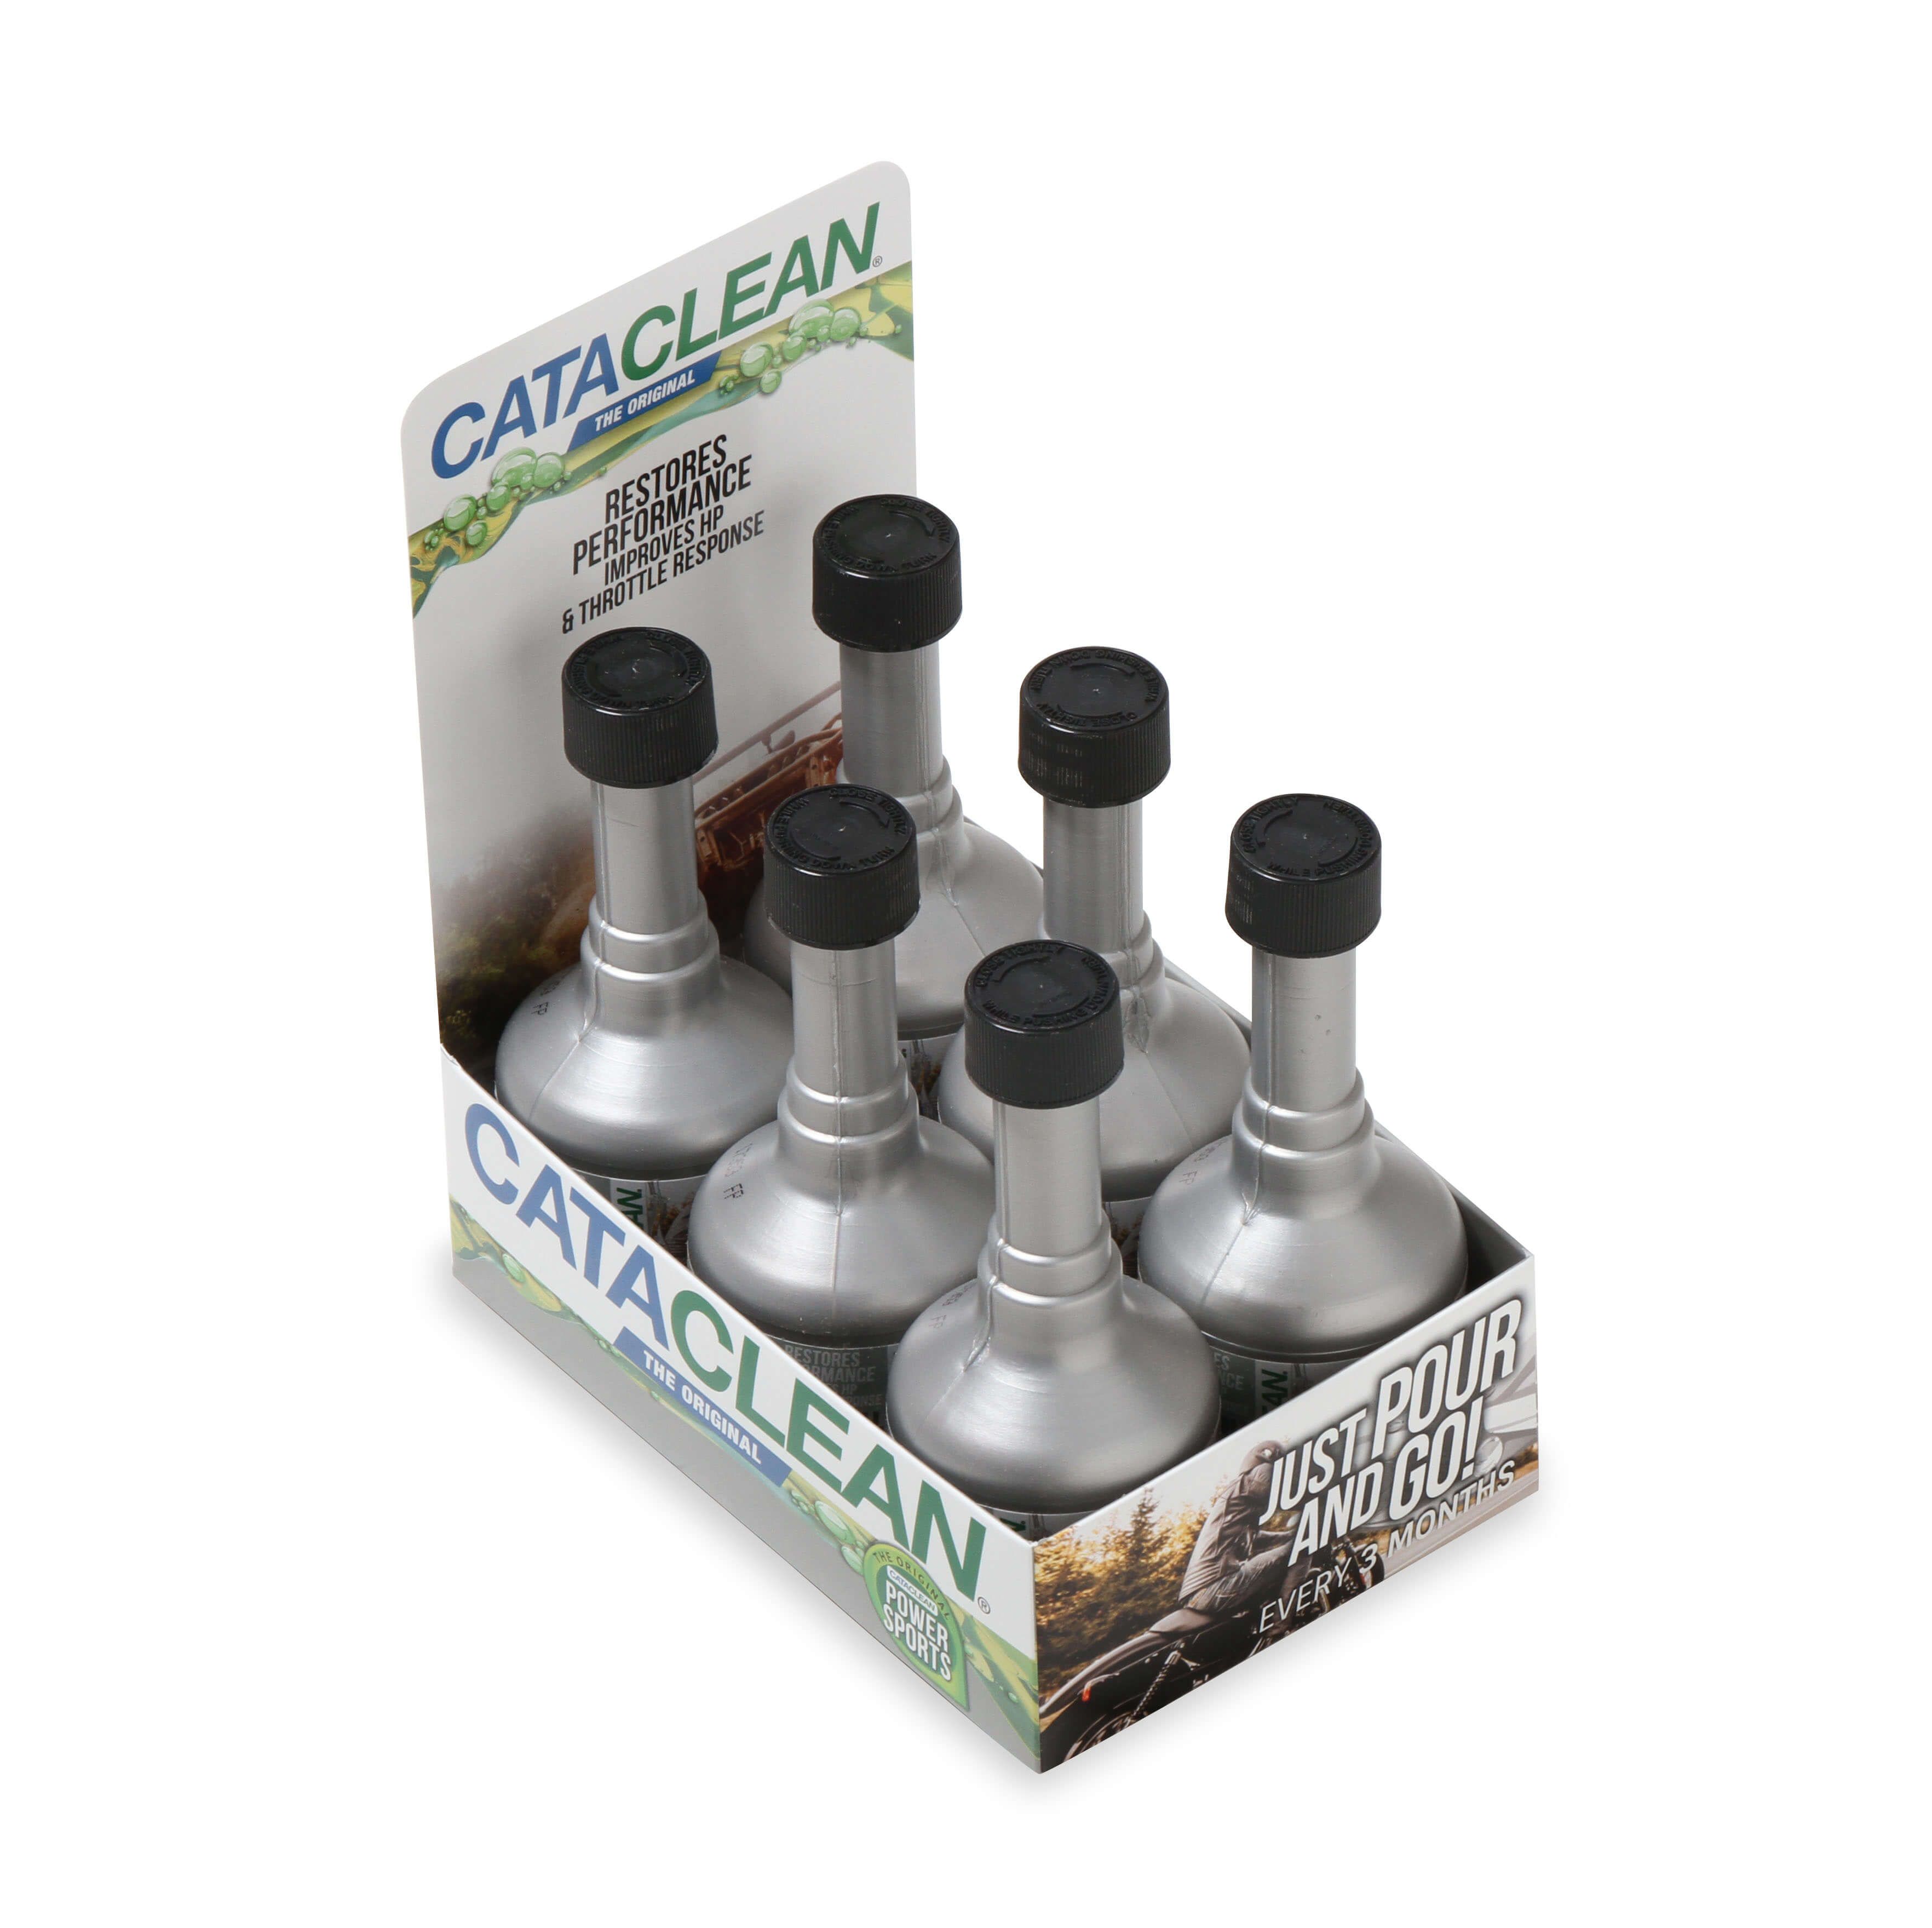 Cataclean Revs Up USA Sales